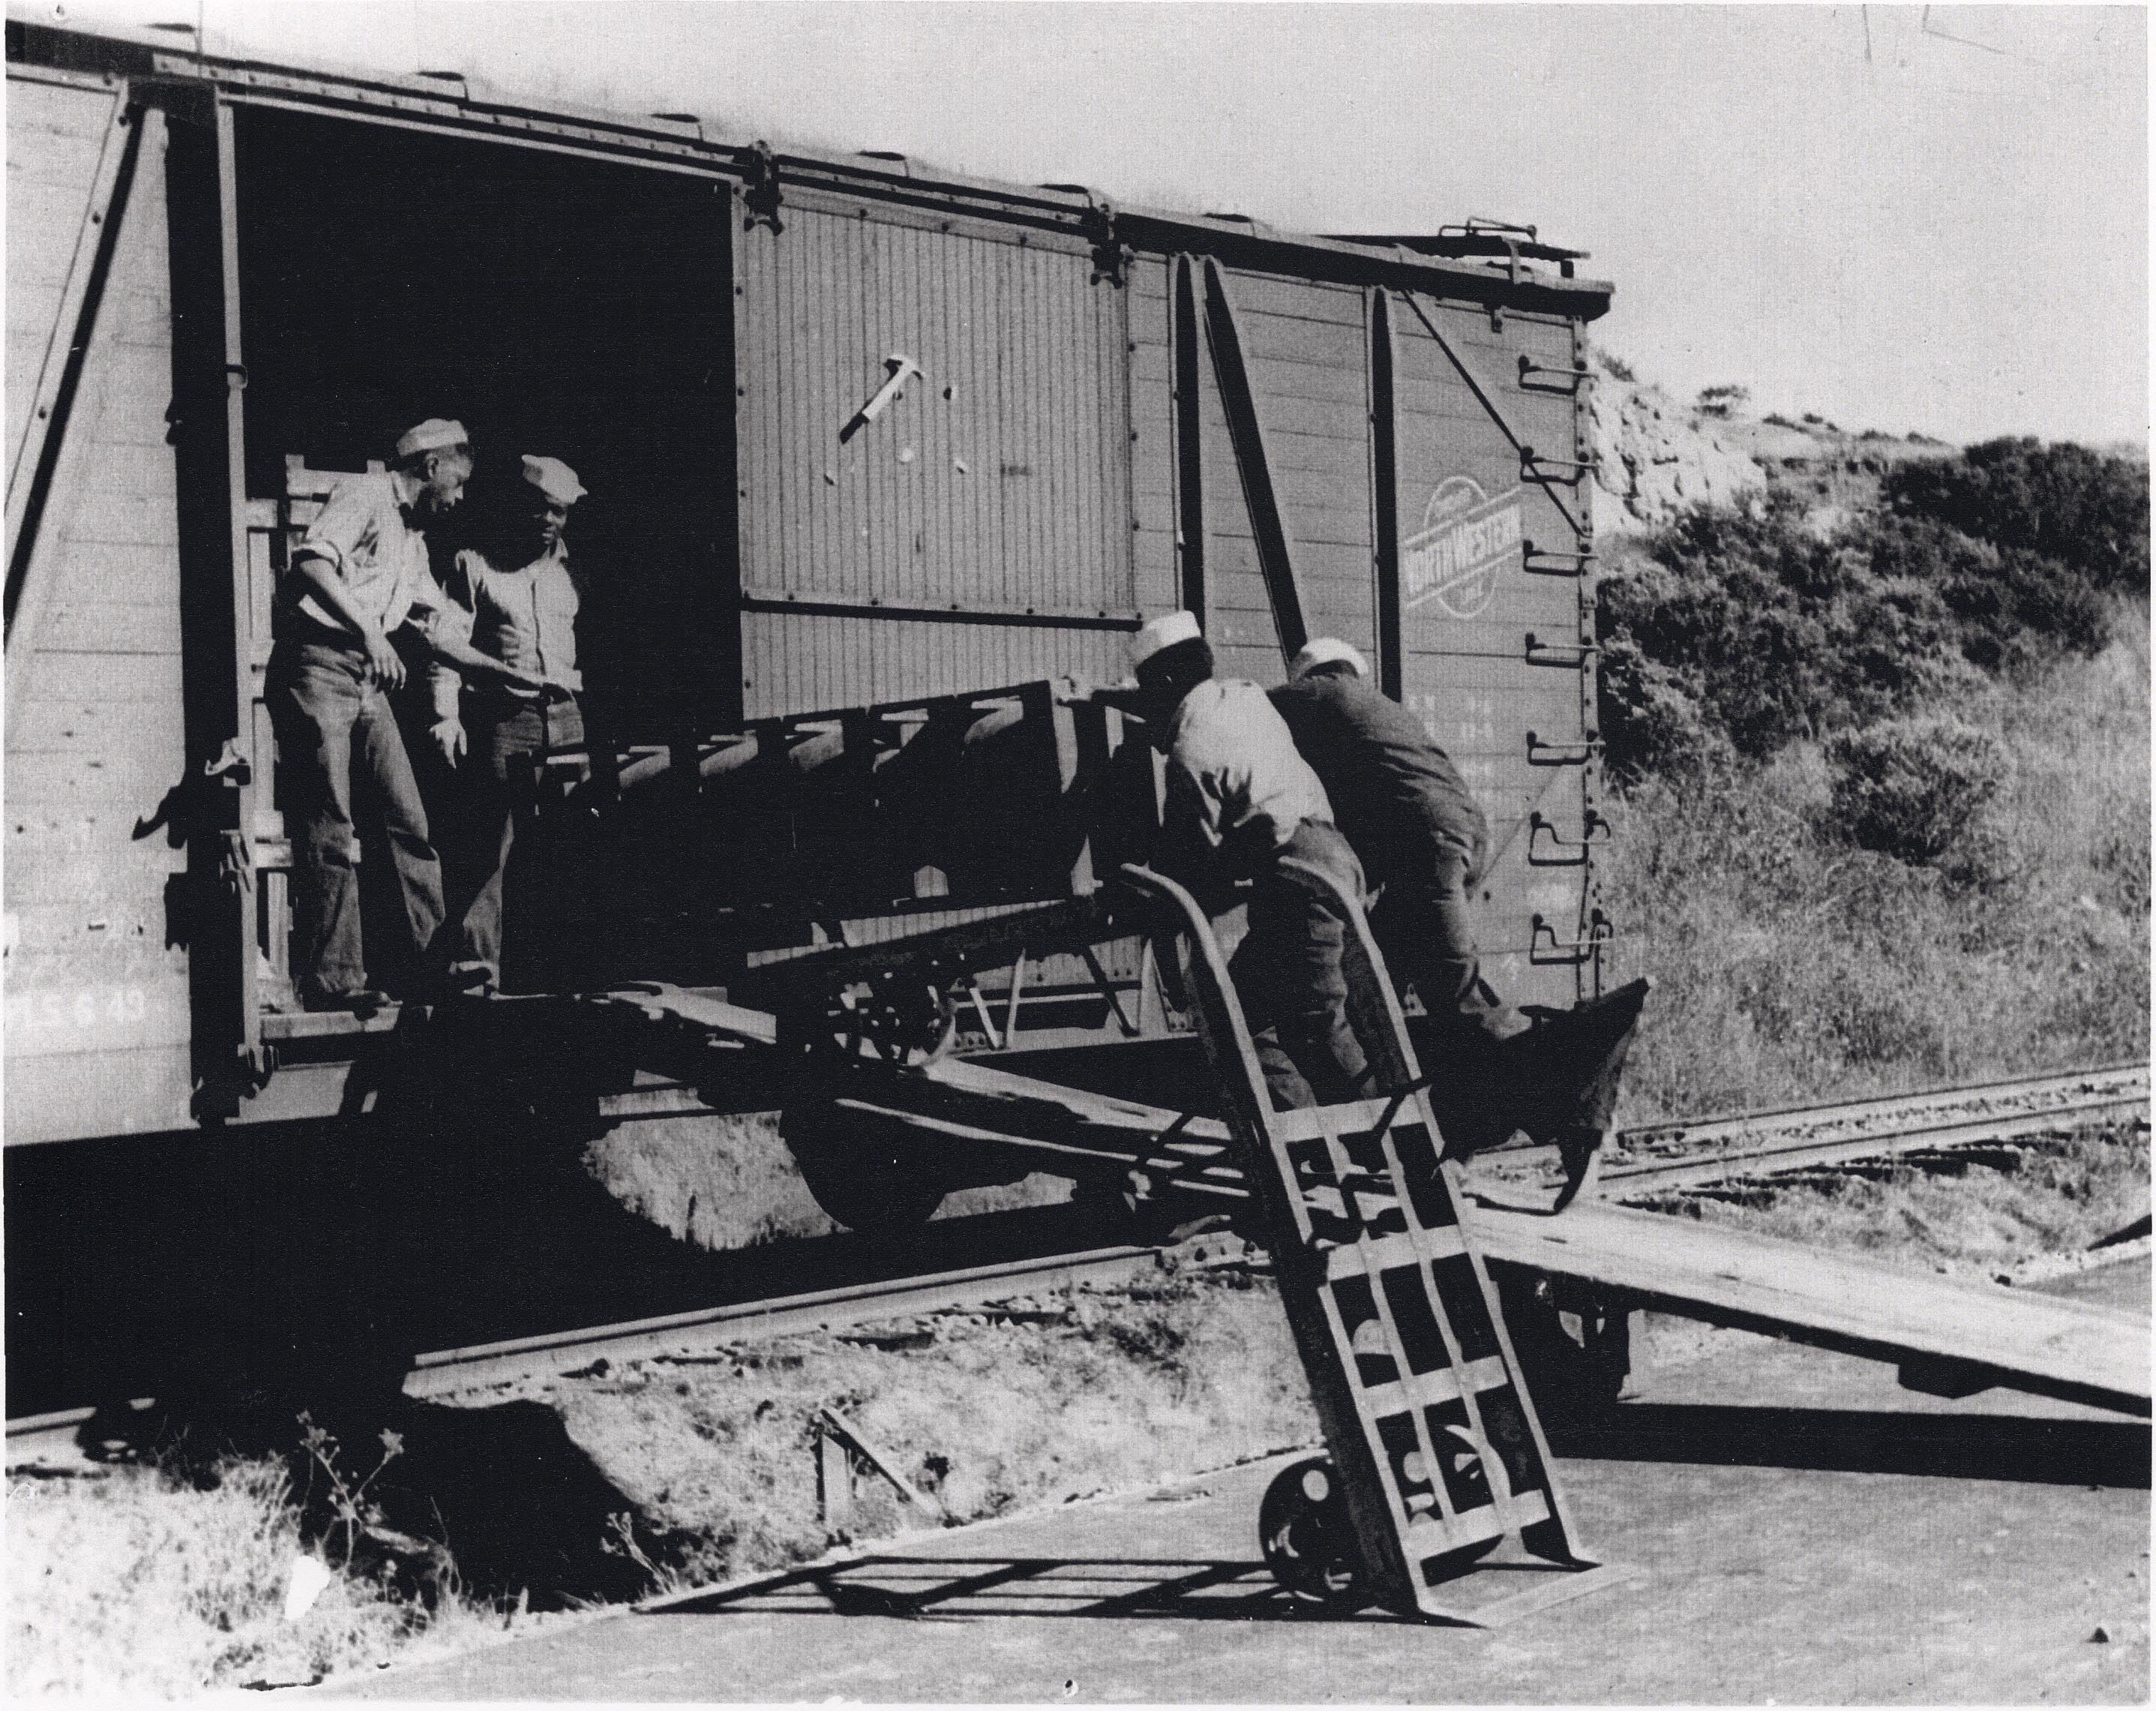 Sailors unloading ammunition from a boxcar Port Chicago. Credit: National Park Service